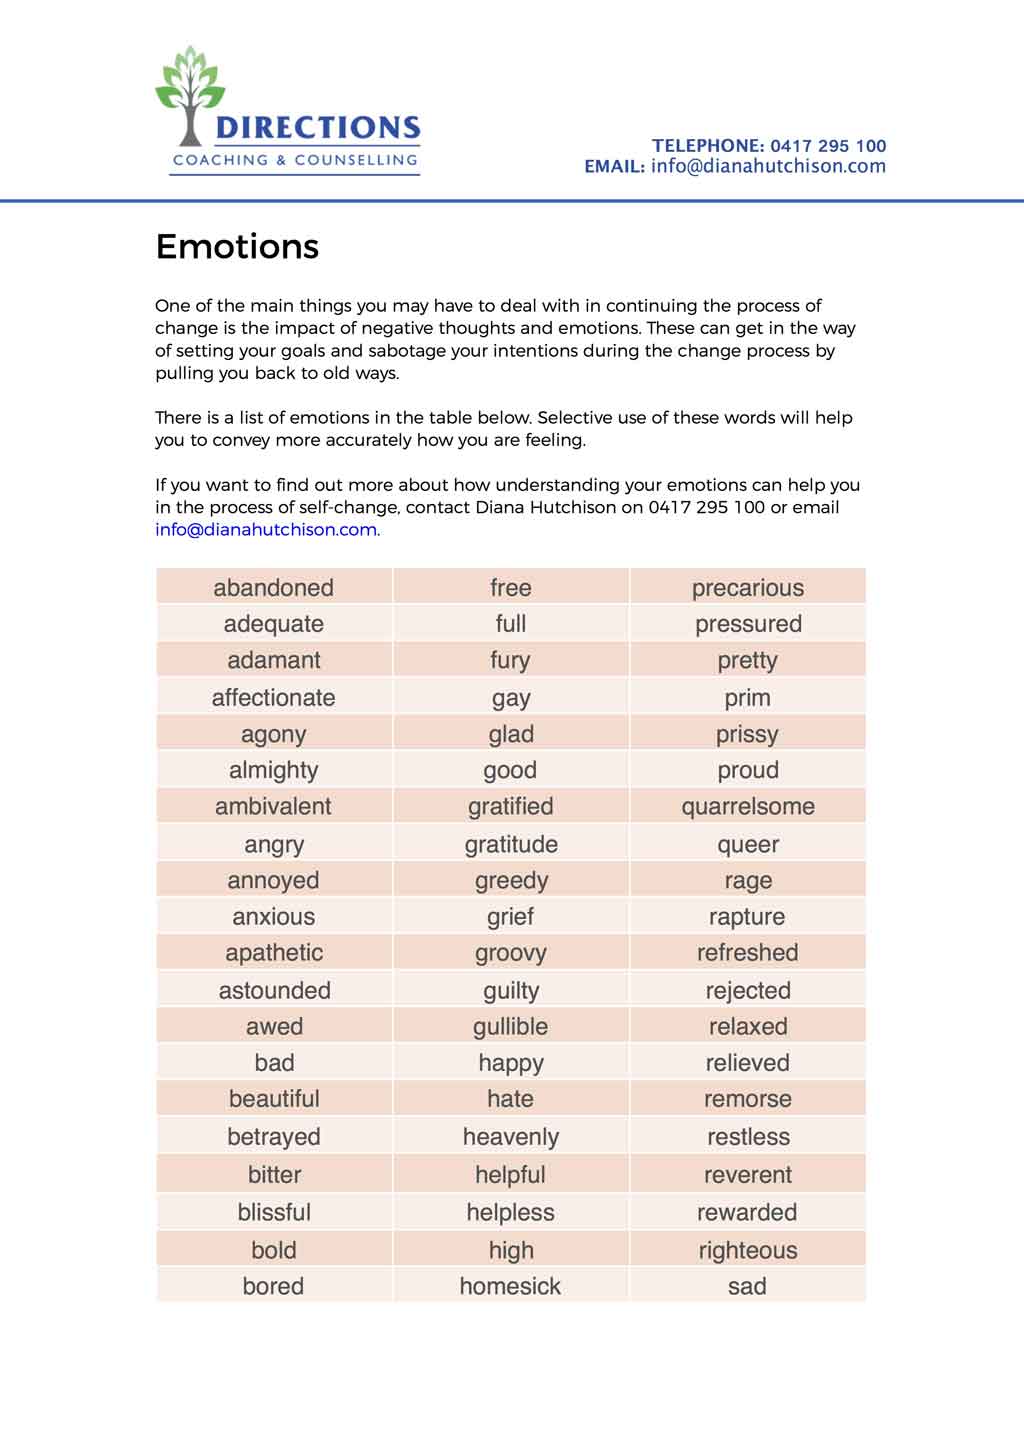 Download a Free Emotions Checklist by Diana Hutchison